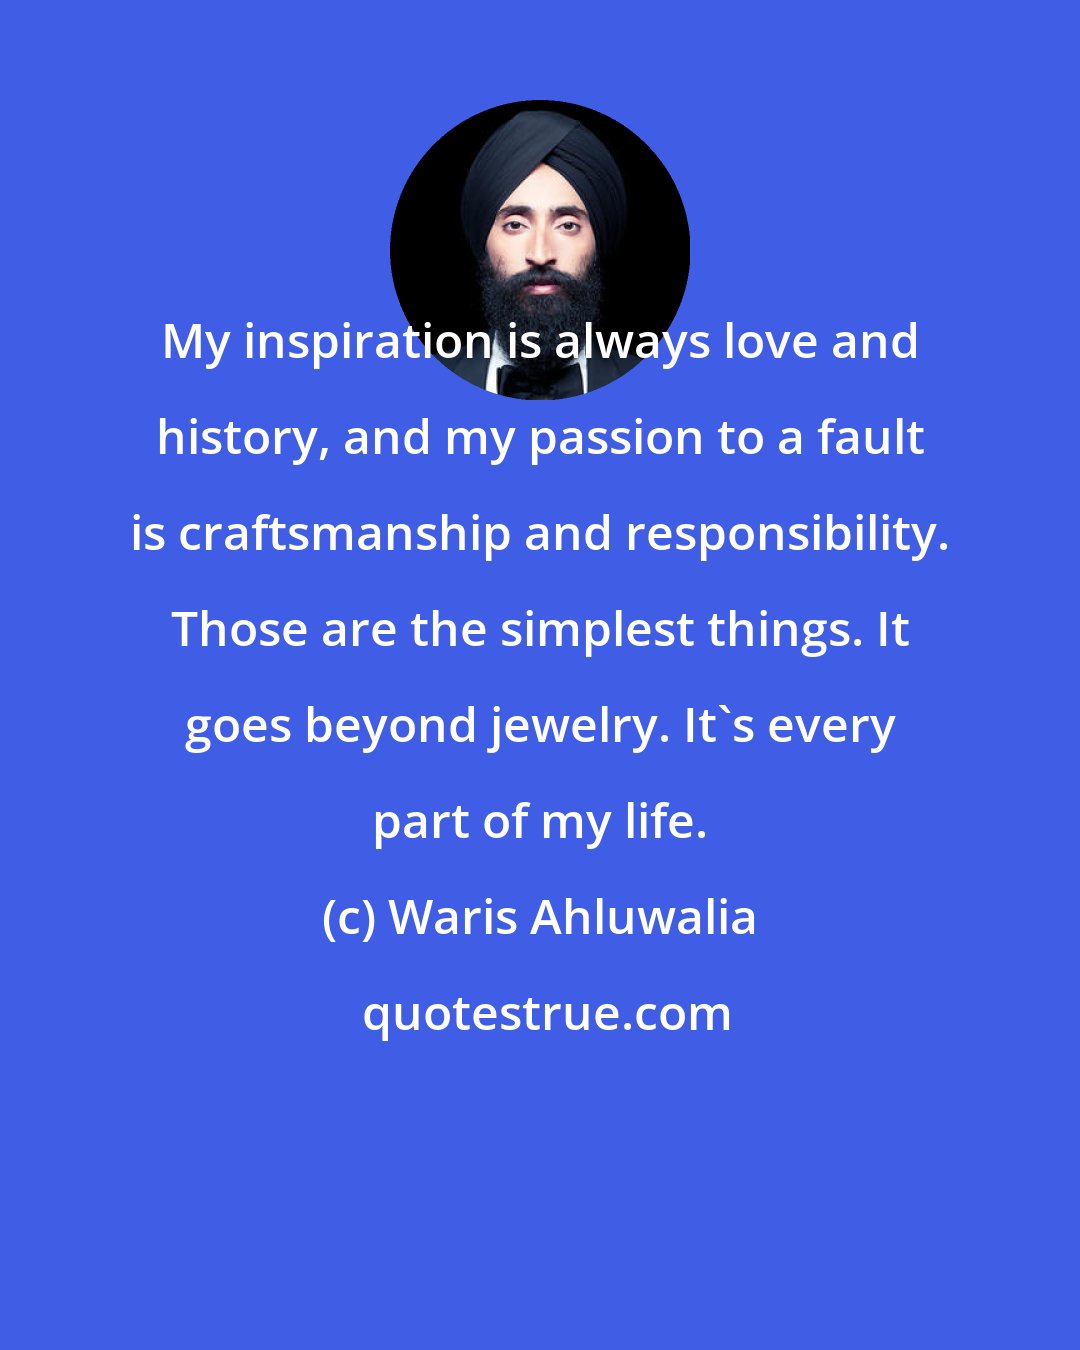 Waris Ahluwalia: My inspiration is always love and history, and my passion to a fault is craftsmanship and responsibility. Those are the simplest things. It goes beyond jewelry. It's every part of my life.